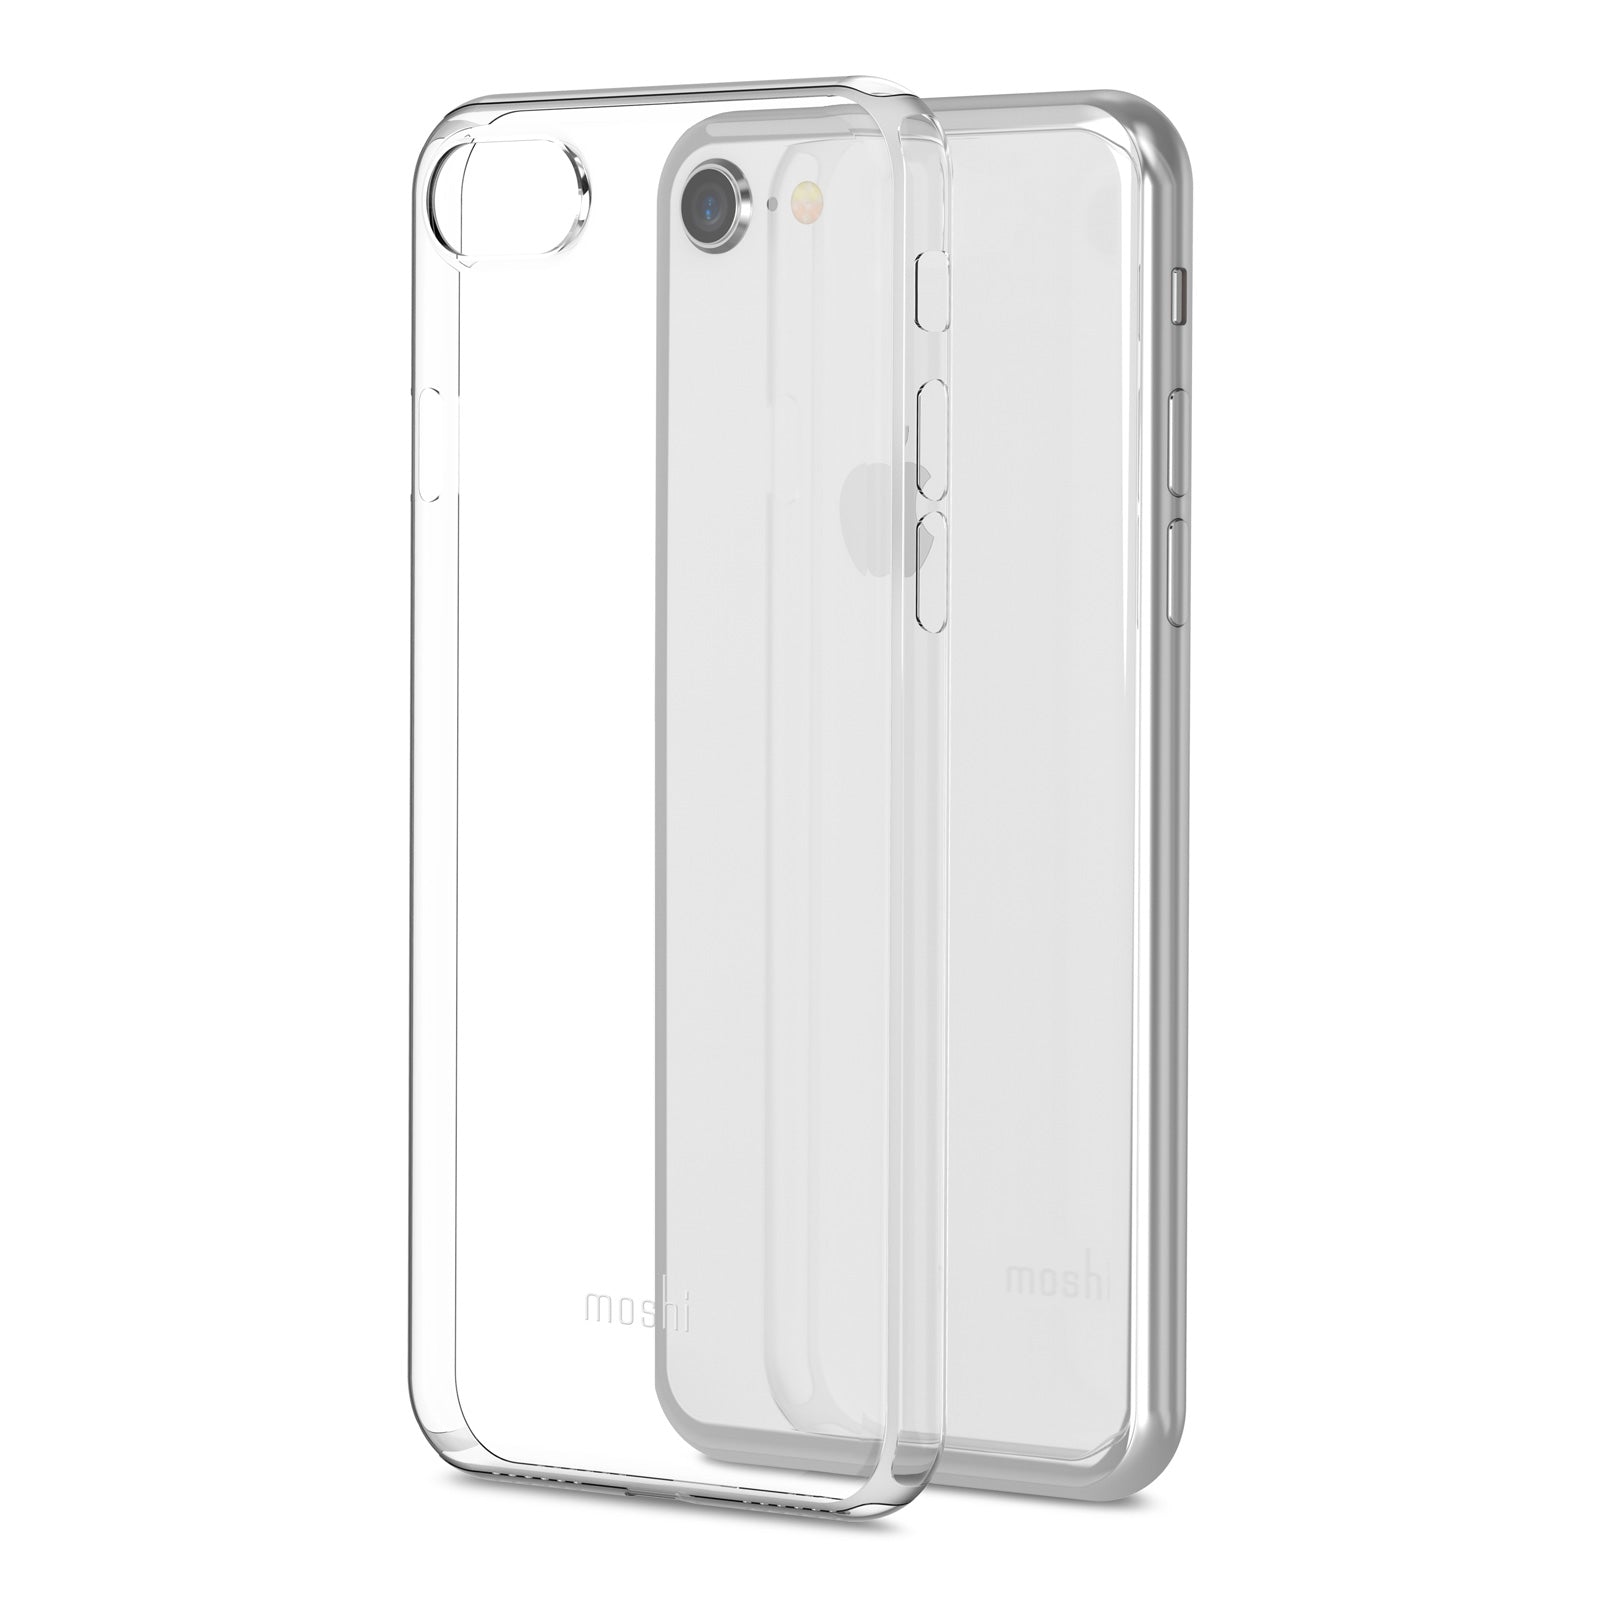 Ofiyaa Clear PC Case for iPhone SE 2020